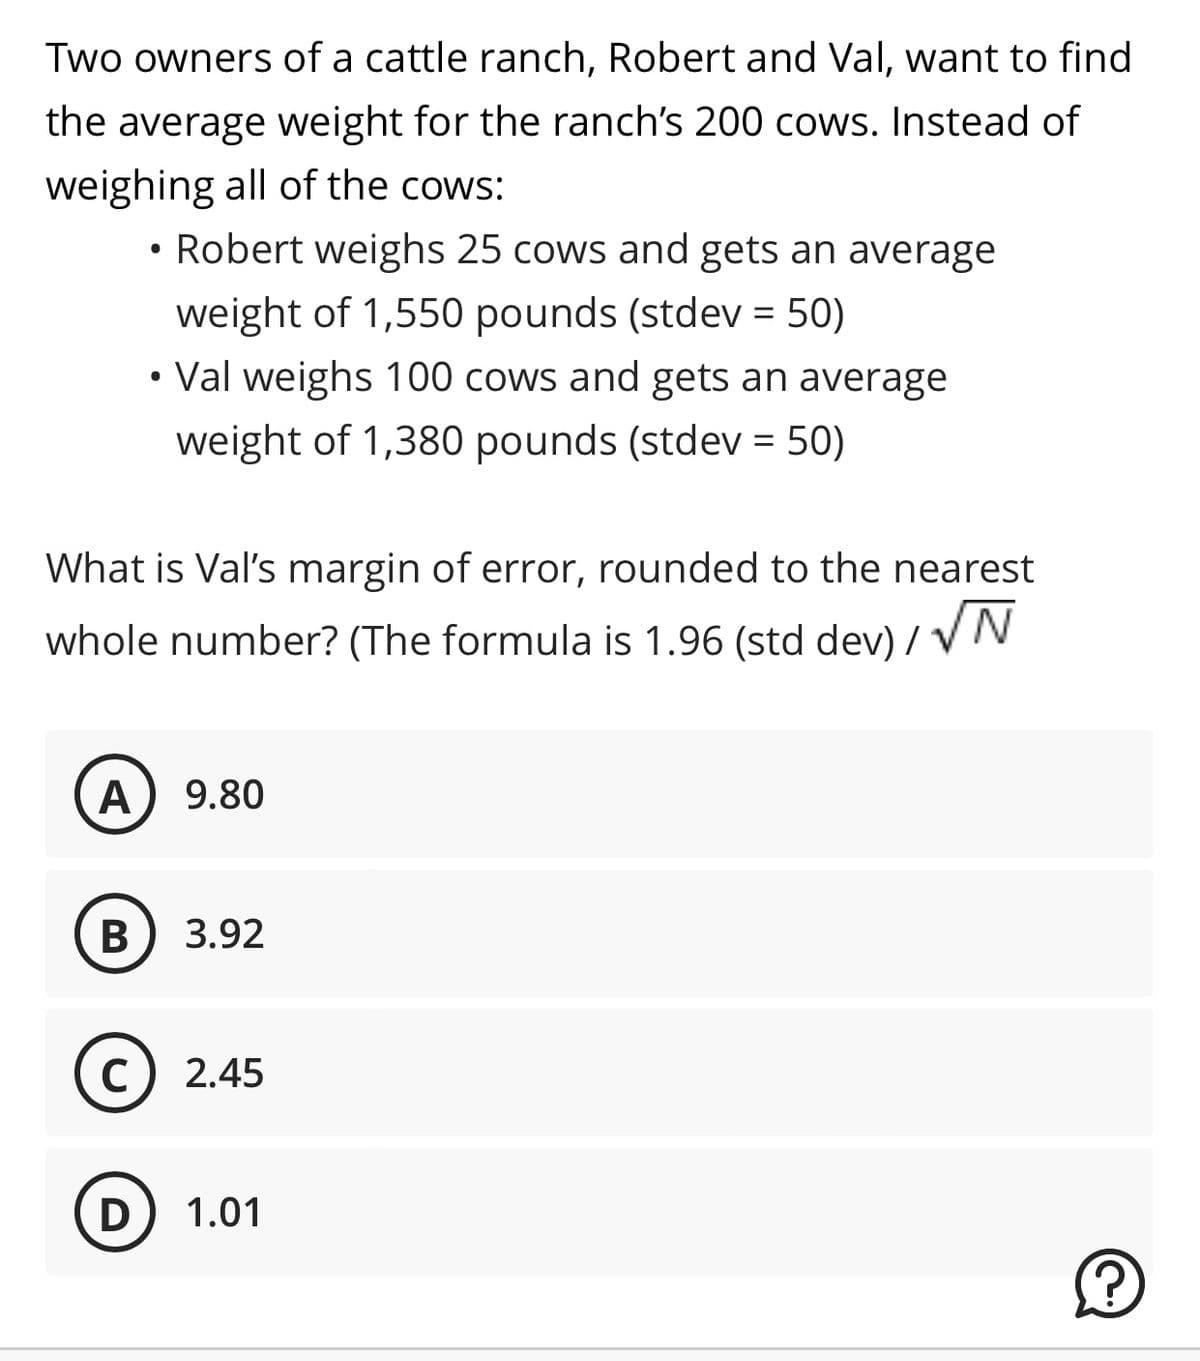 Two owners of a cattle ranch, Robert and Val, want to find
the average weight for the ranch's 200 cows. Instead of
weighing all of the cows:
• Robert weighs 25 cows and gets an average
weight of 1,550 pounds (stdev = 50)
• Val weighs 100 cows and gets an average
weight of 1,380 pounds (stdev = 50)
What is Val's margin of error, rounded to the nearest
whole number? (The formula is 1.96 (std dev)/√N
A
9.80
B 3.92
с 2.45
D 1.01